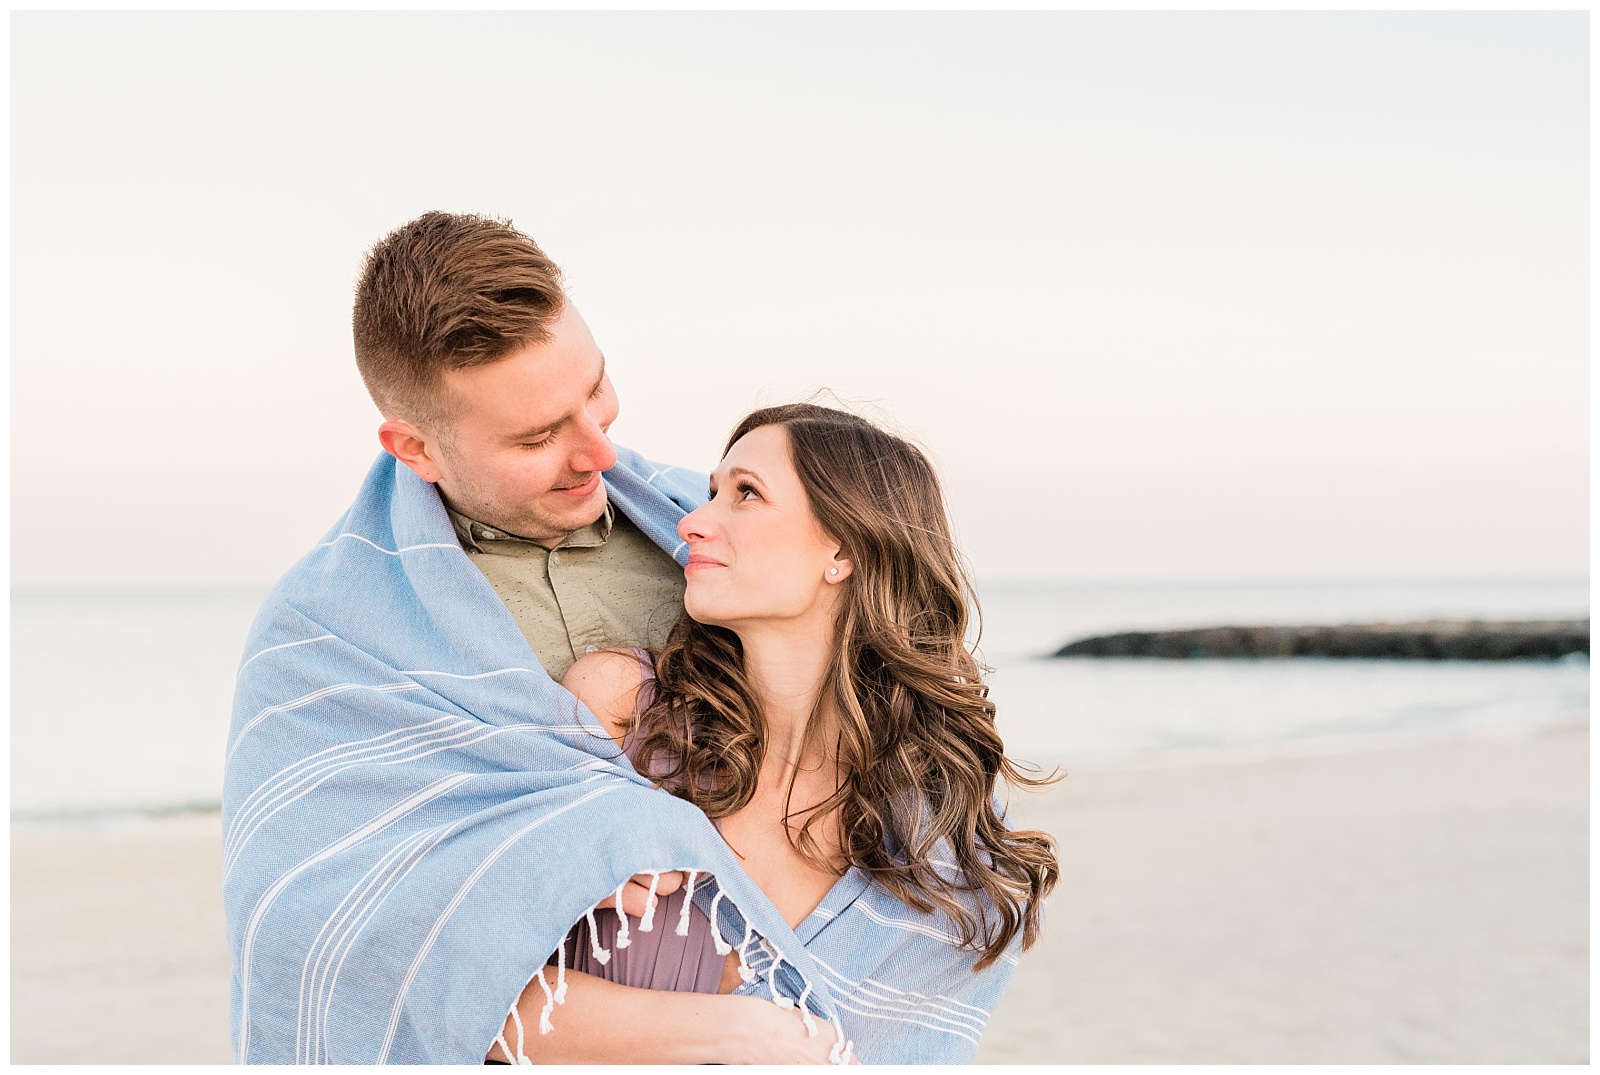 New Jersey, Engagement Session, Asbury Park, NJ, Wedding Photographer, Springtime, Light and Airy, Golden Hour, Beach, Blanket, Wrapped Up